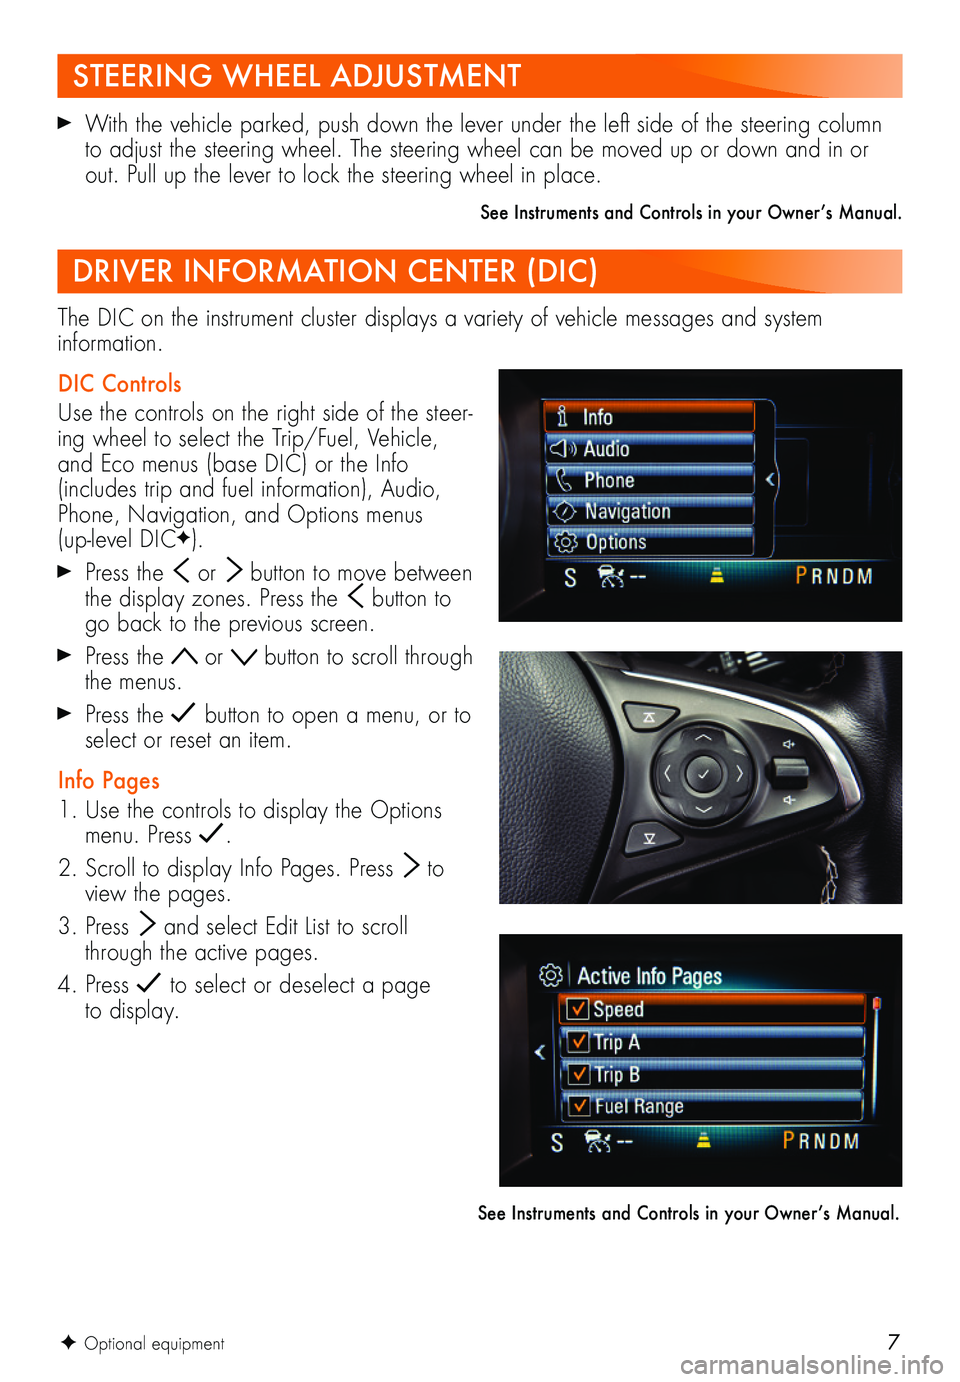 BUICK REGAL SPORTBACK 2018  Get To Know Guide 7
The DIC on the instrument cluster displays a variety of vehicle messages and system  information. 
DIC Controls
Use the controls on the right side of the steer-ing wheel to select the Trip/Fuel, Veh